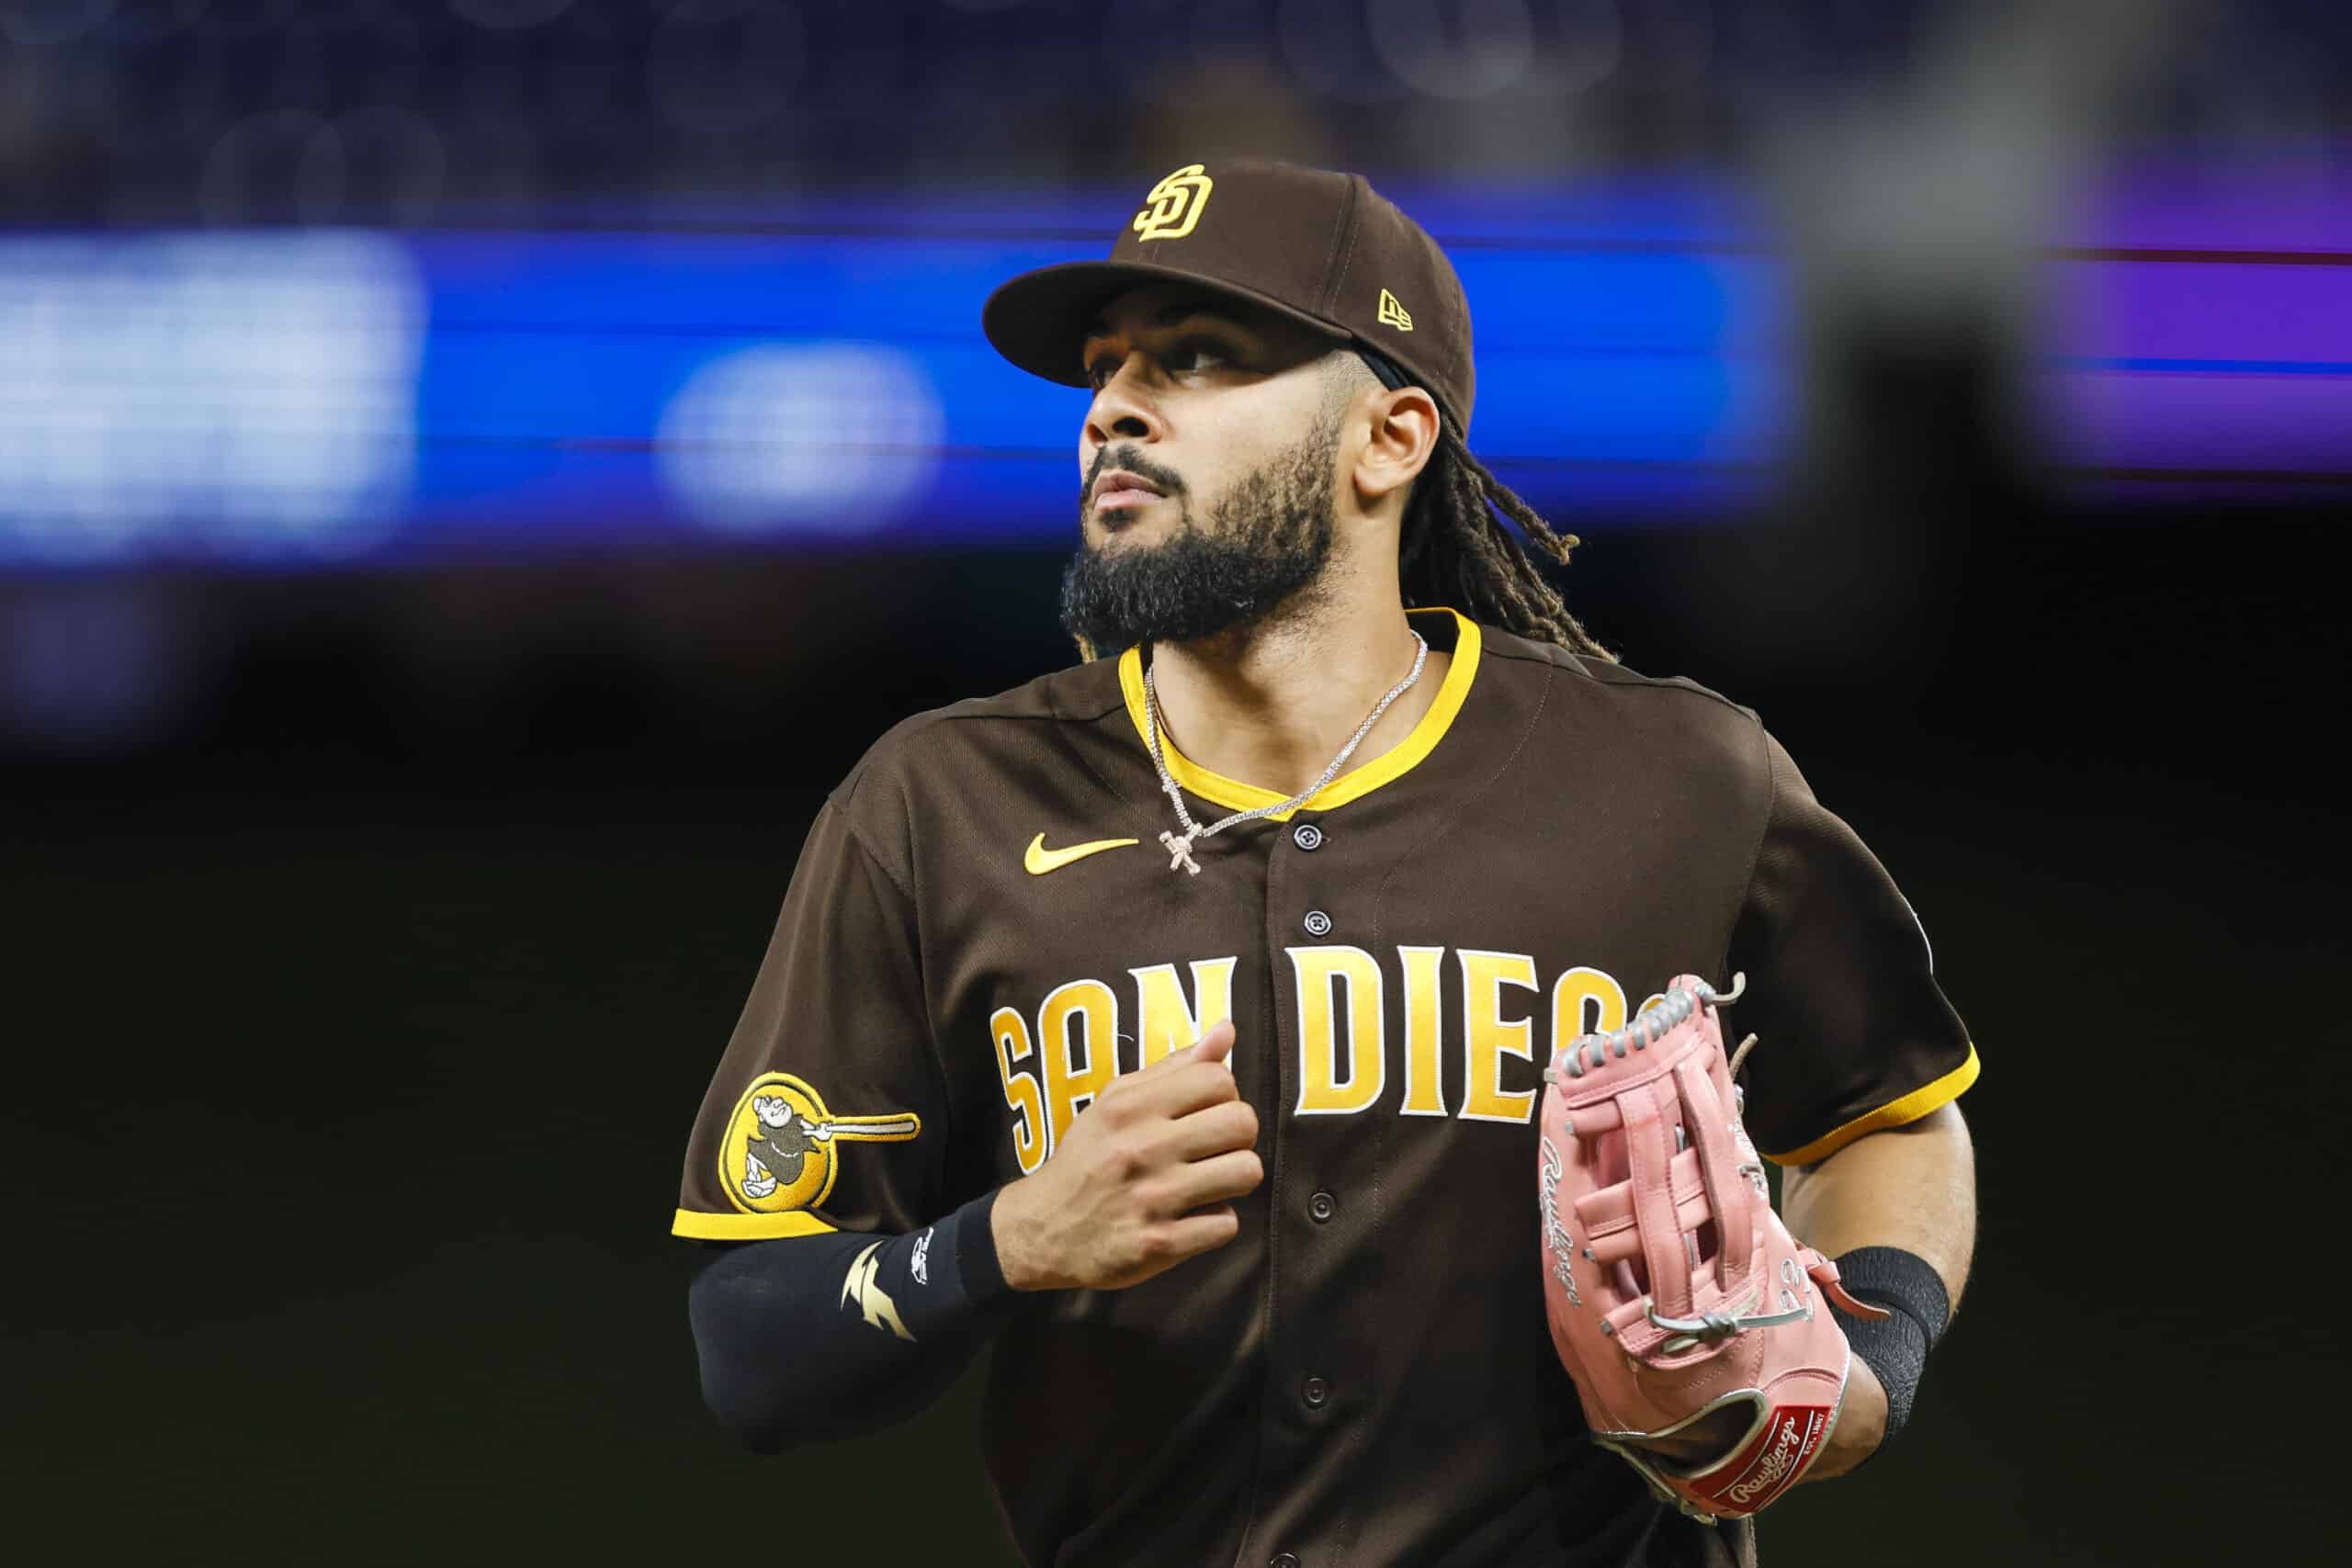 San Diego Padres first MLB team to reach uniform ad deal for 2023